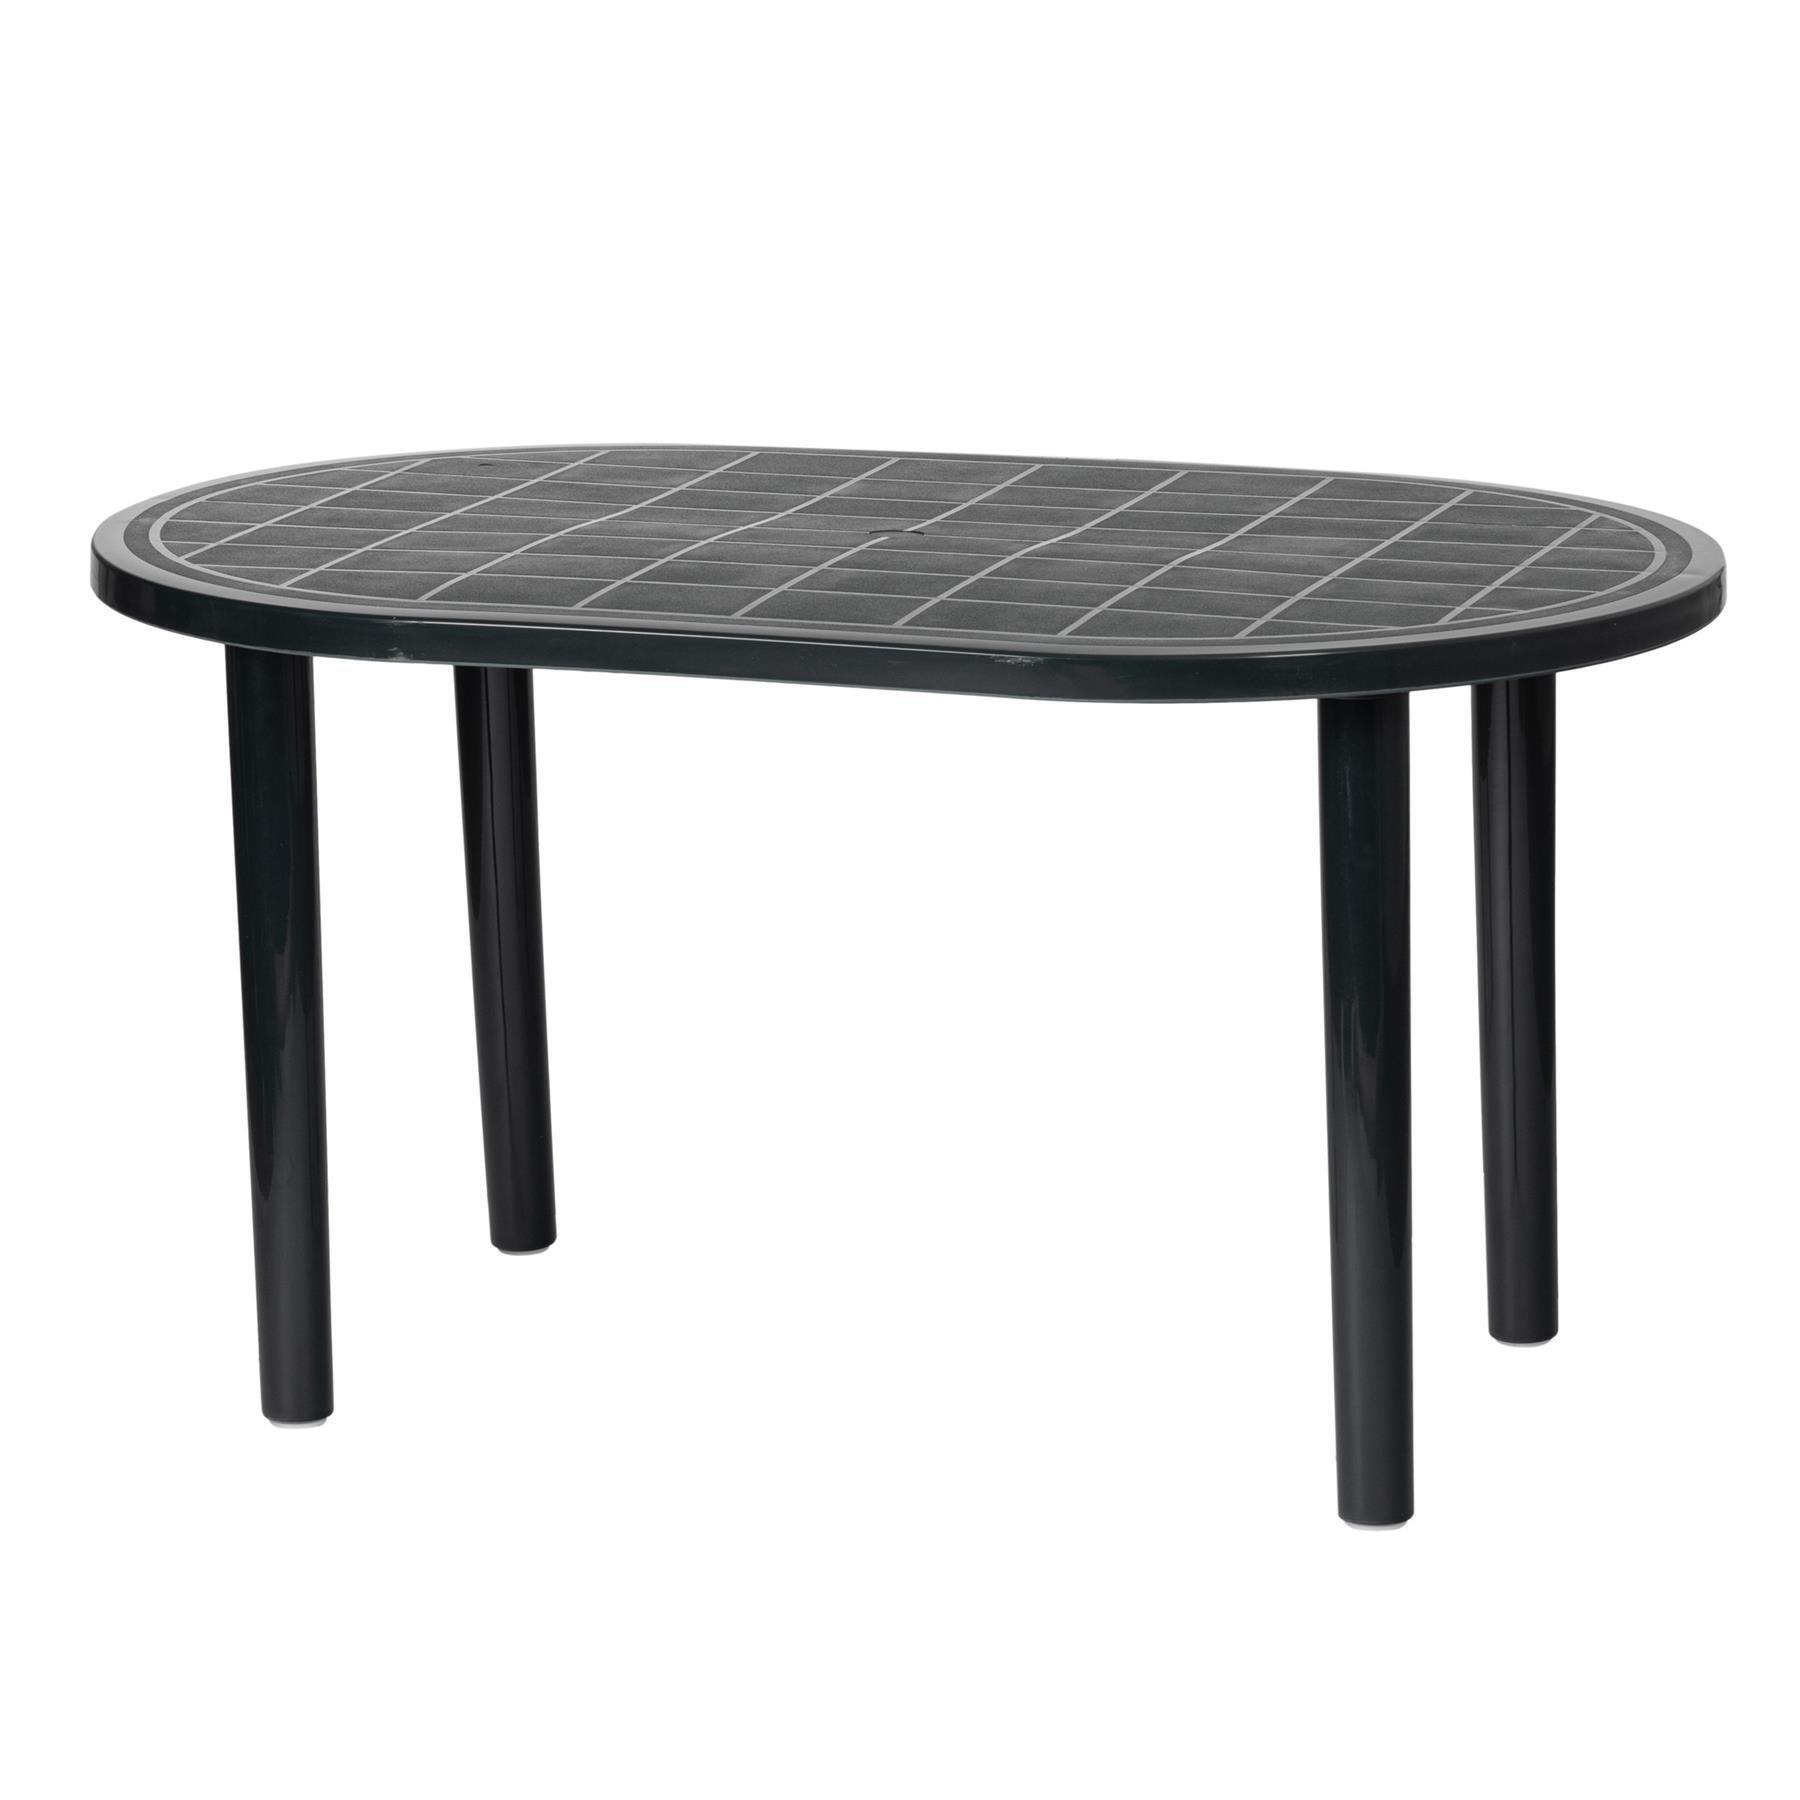 Gala 4 Seater Garden Dining Table - image 1